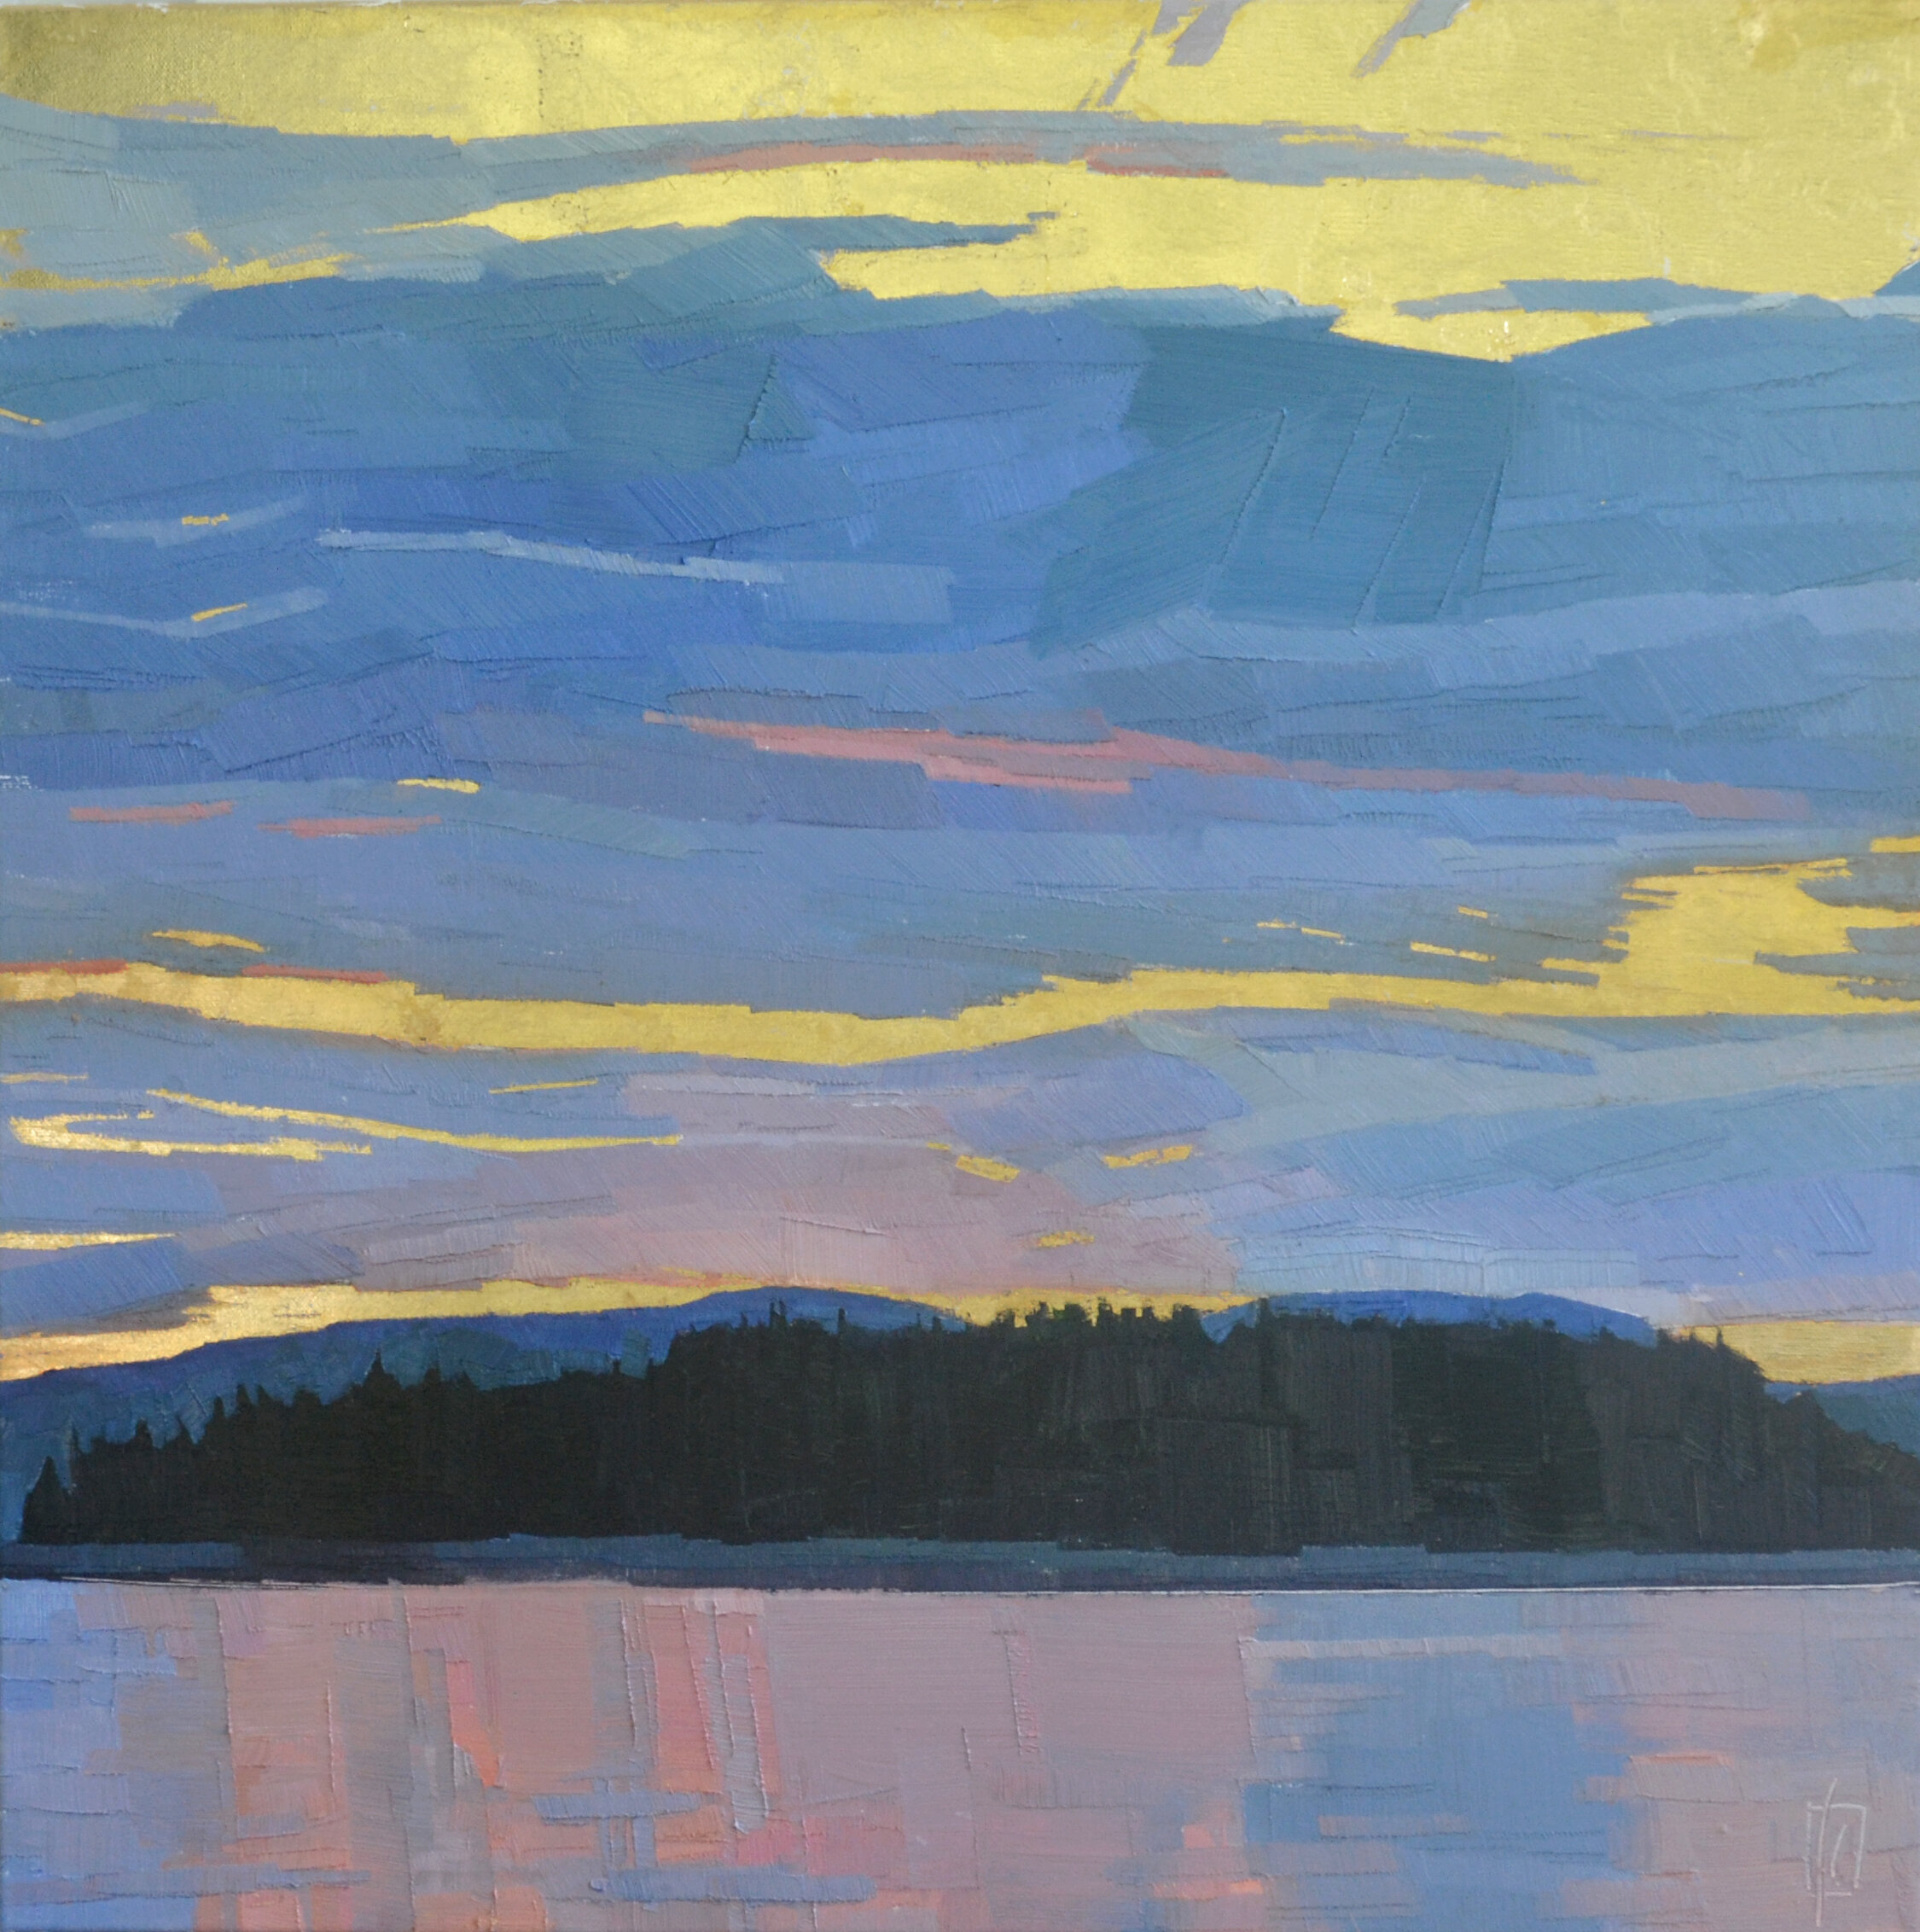   Good Night Bear Island  18 x 18 oil and 24K gold on panel  sold  NW Barrett Gallery  